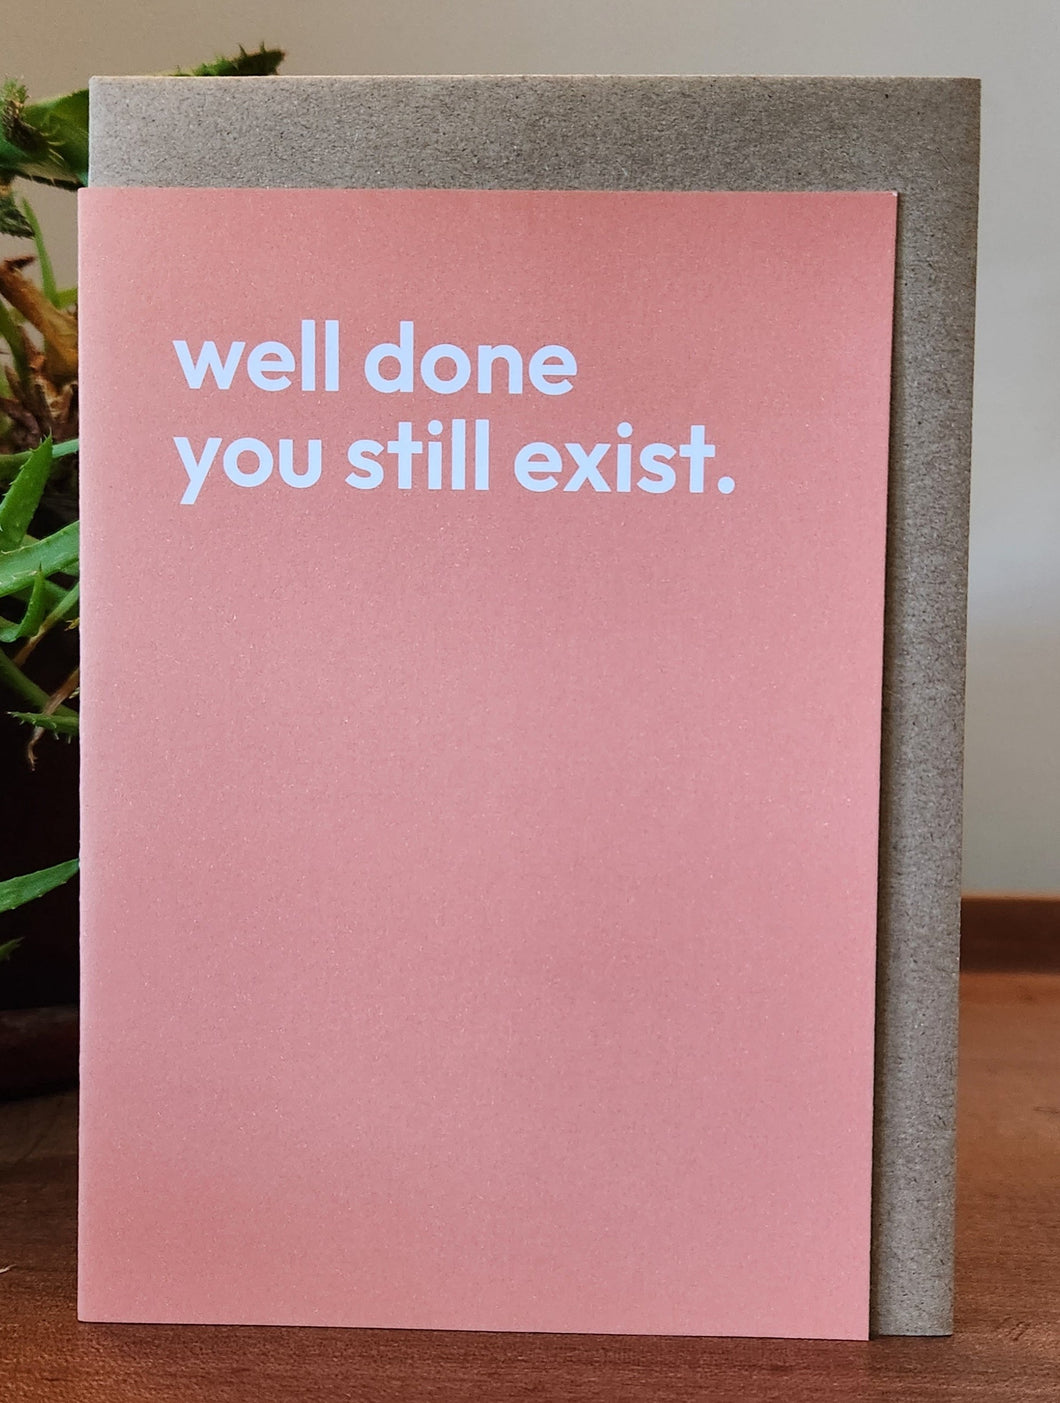 Well done you still exist - Greeting Card